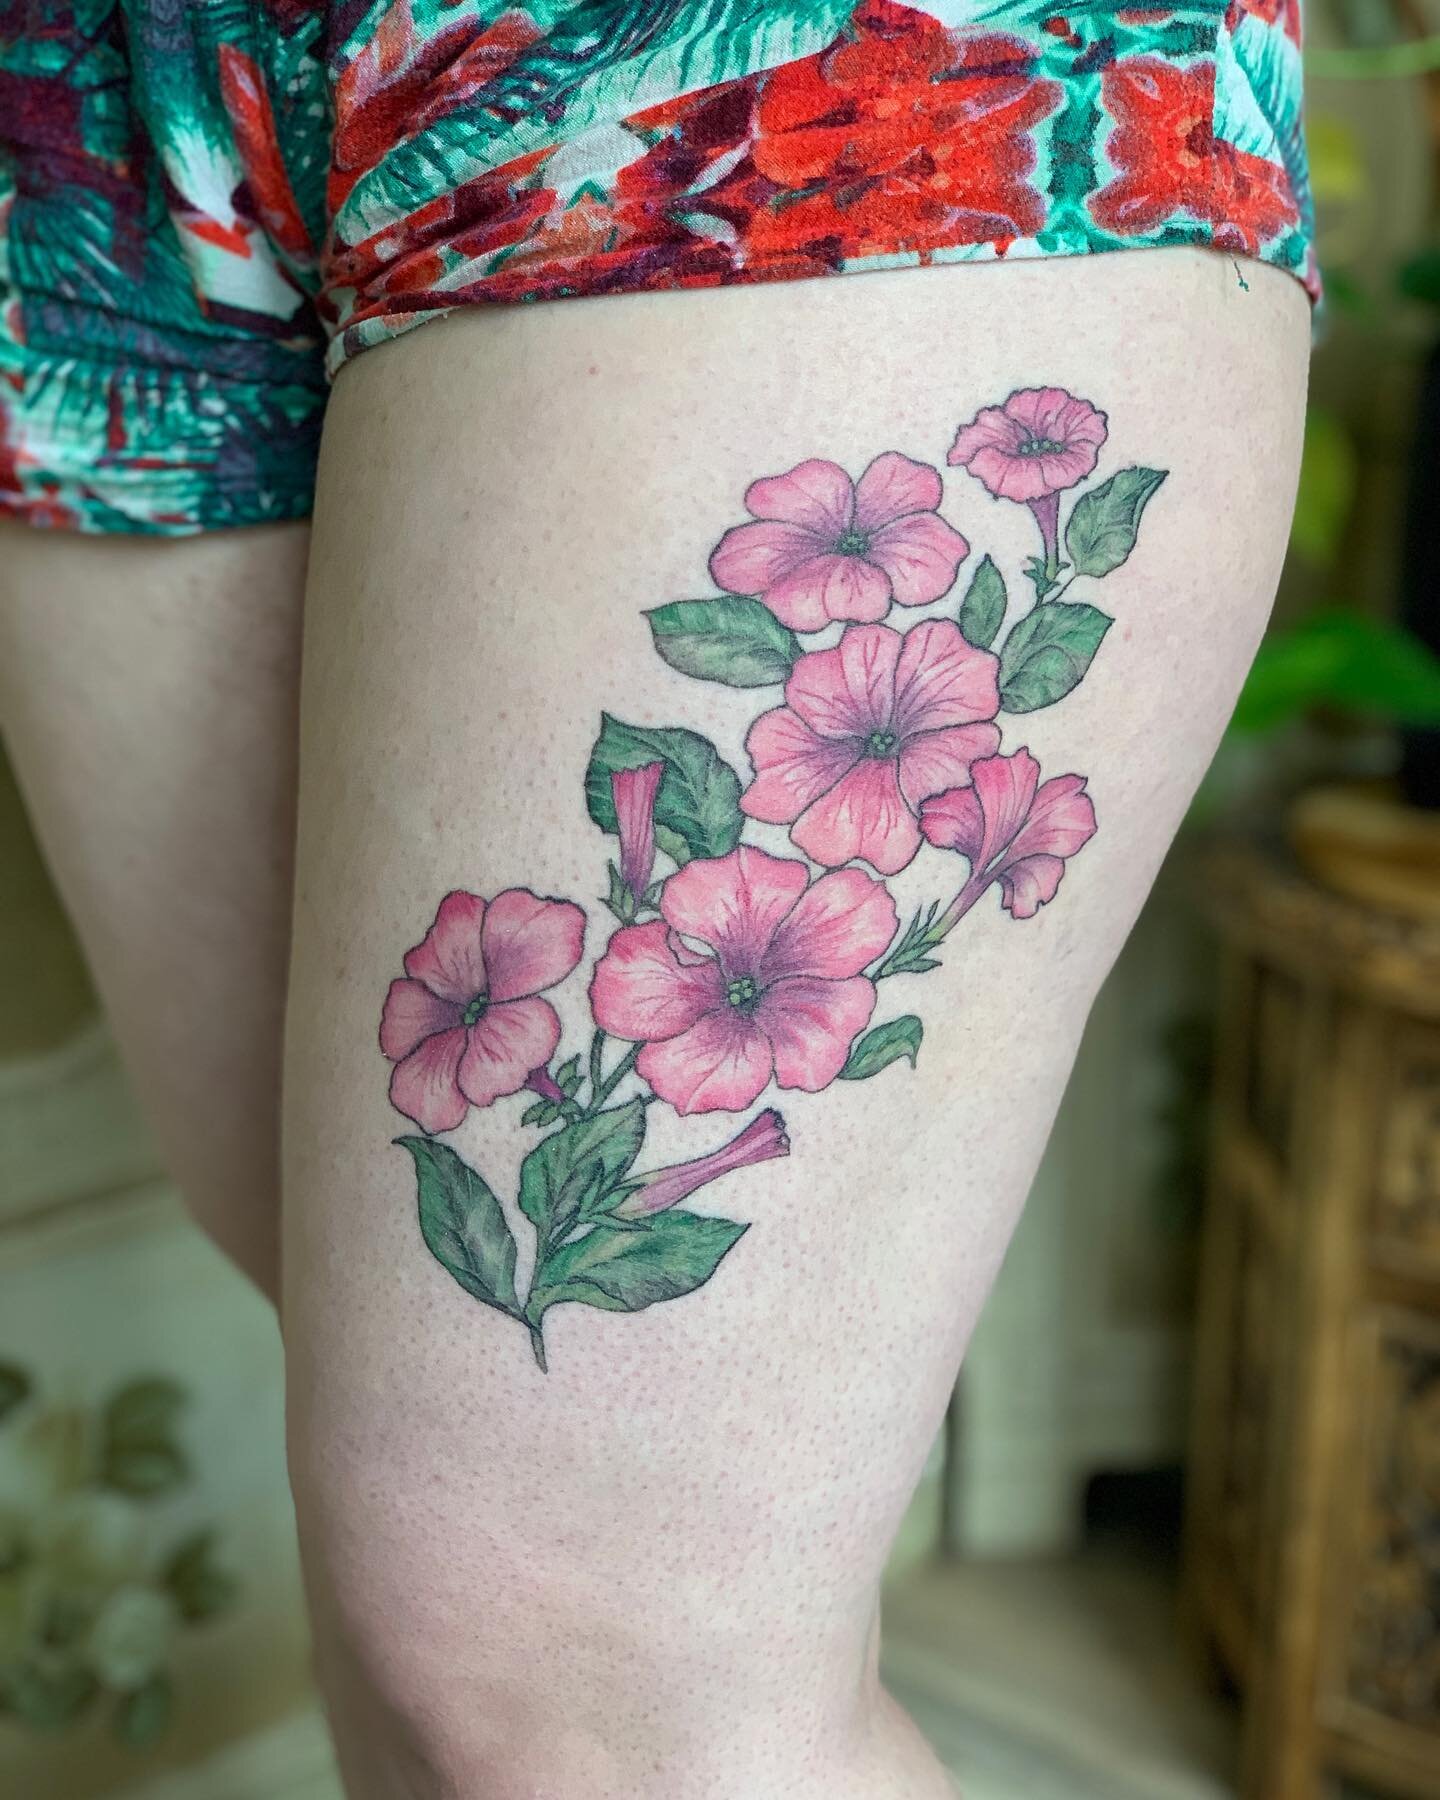 Healed petunias and photographed in natural daylight 🌞 Thank you Janine, it was amazing to see you today!
.
.
.
#healedtattoo #petuniaflowers #petuniatattoo #botanicaltattoo